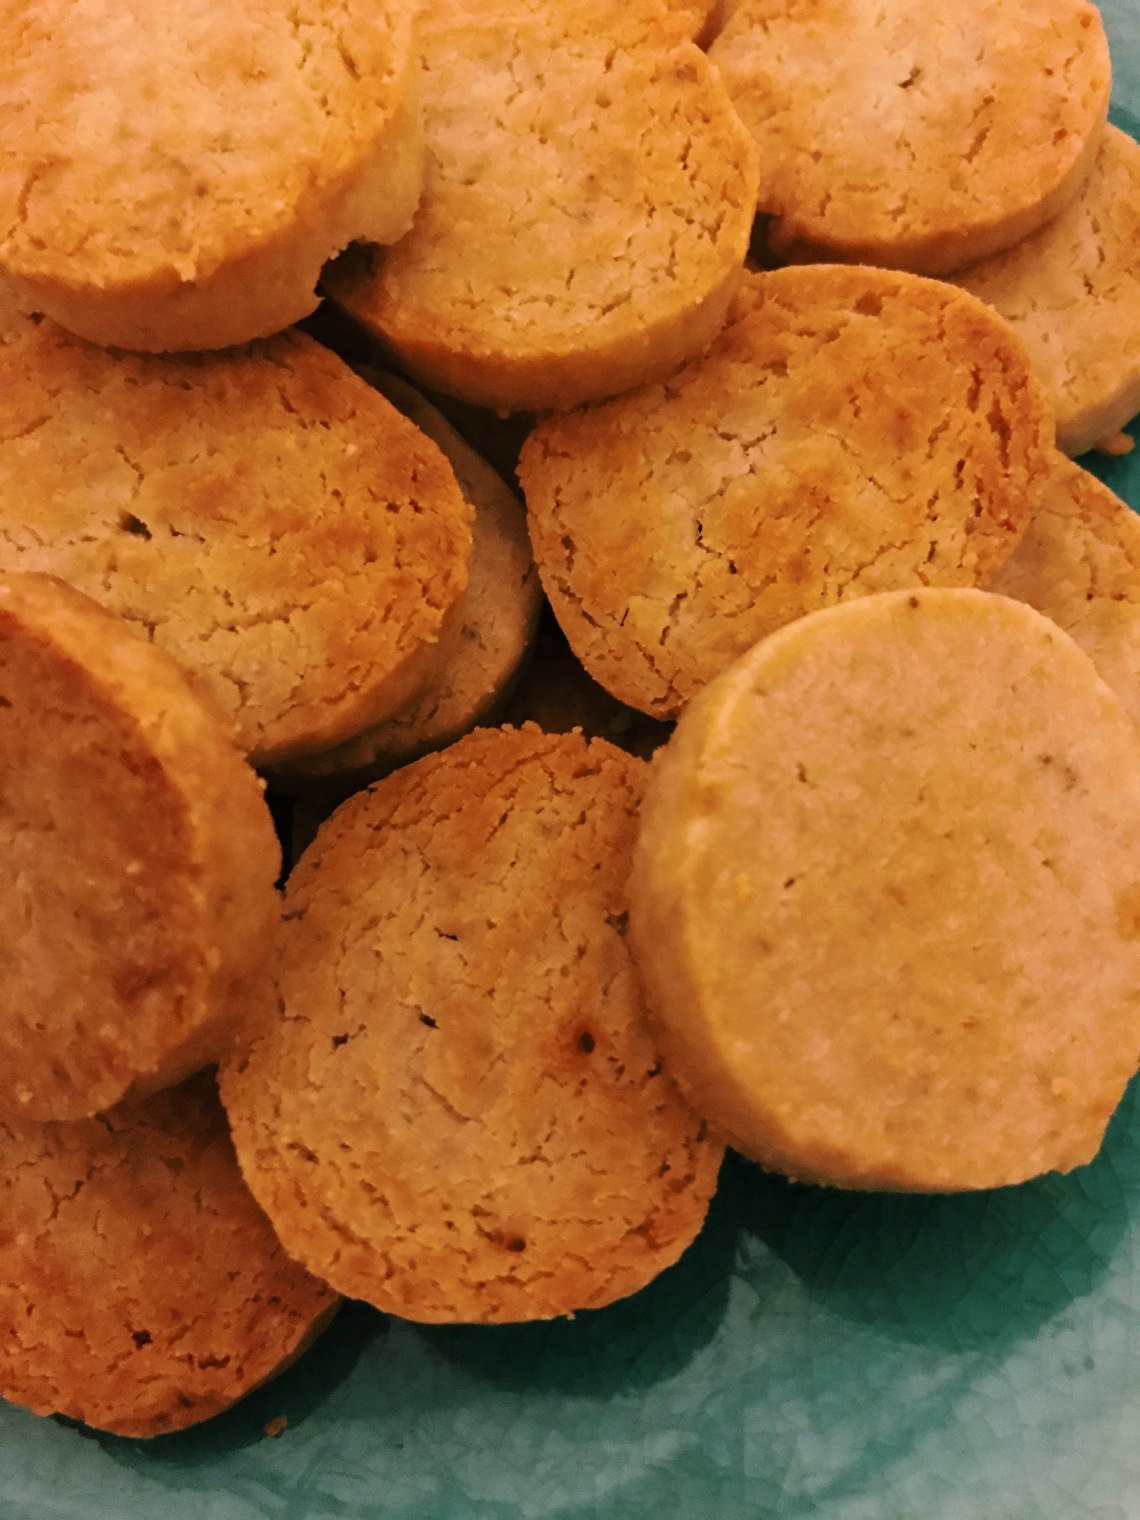 A close up of biscuits.